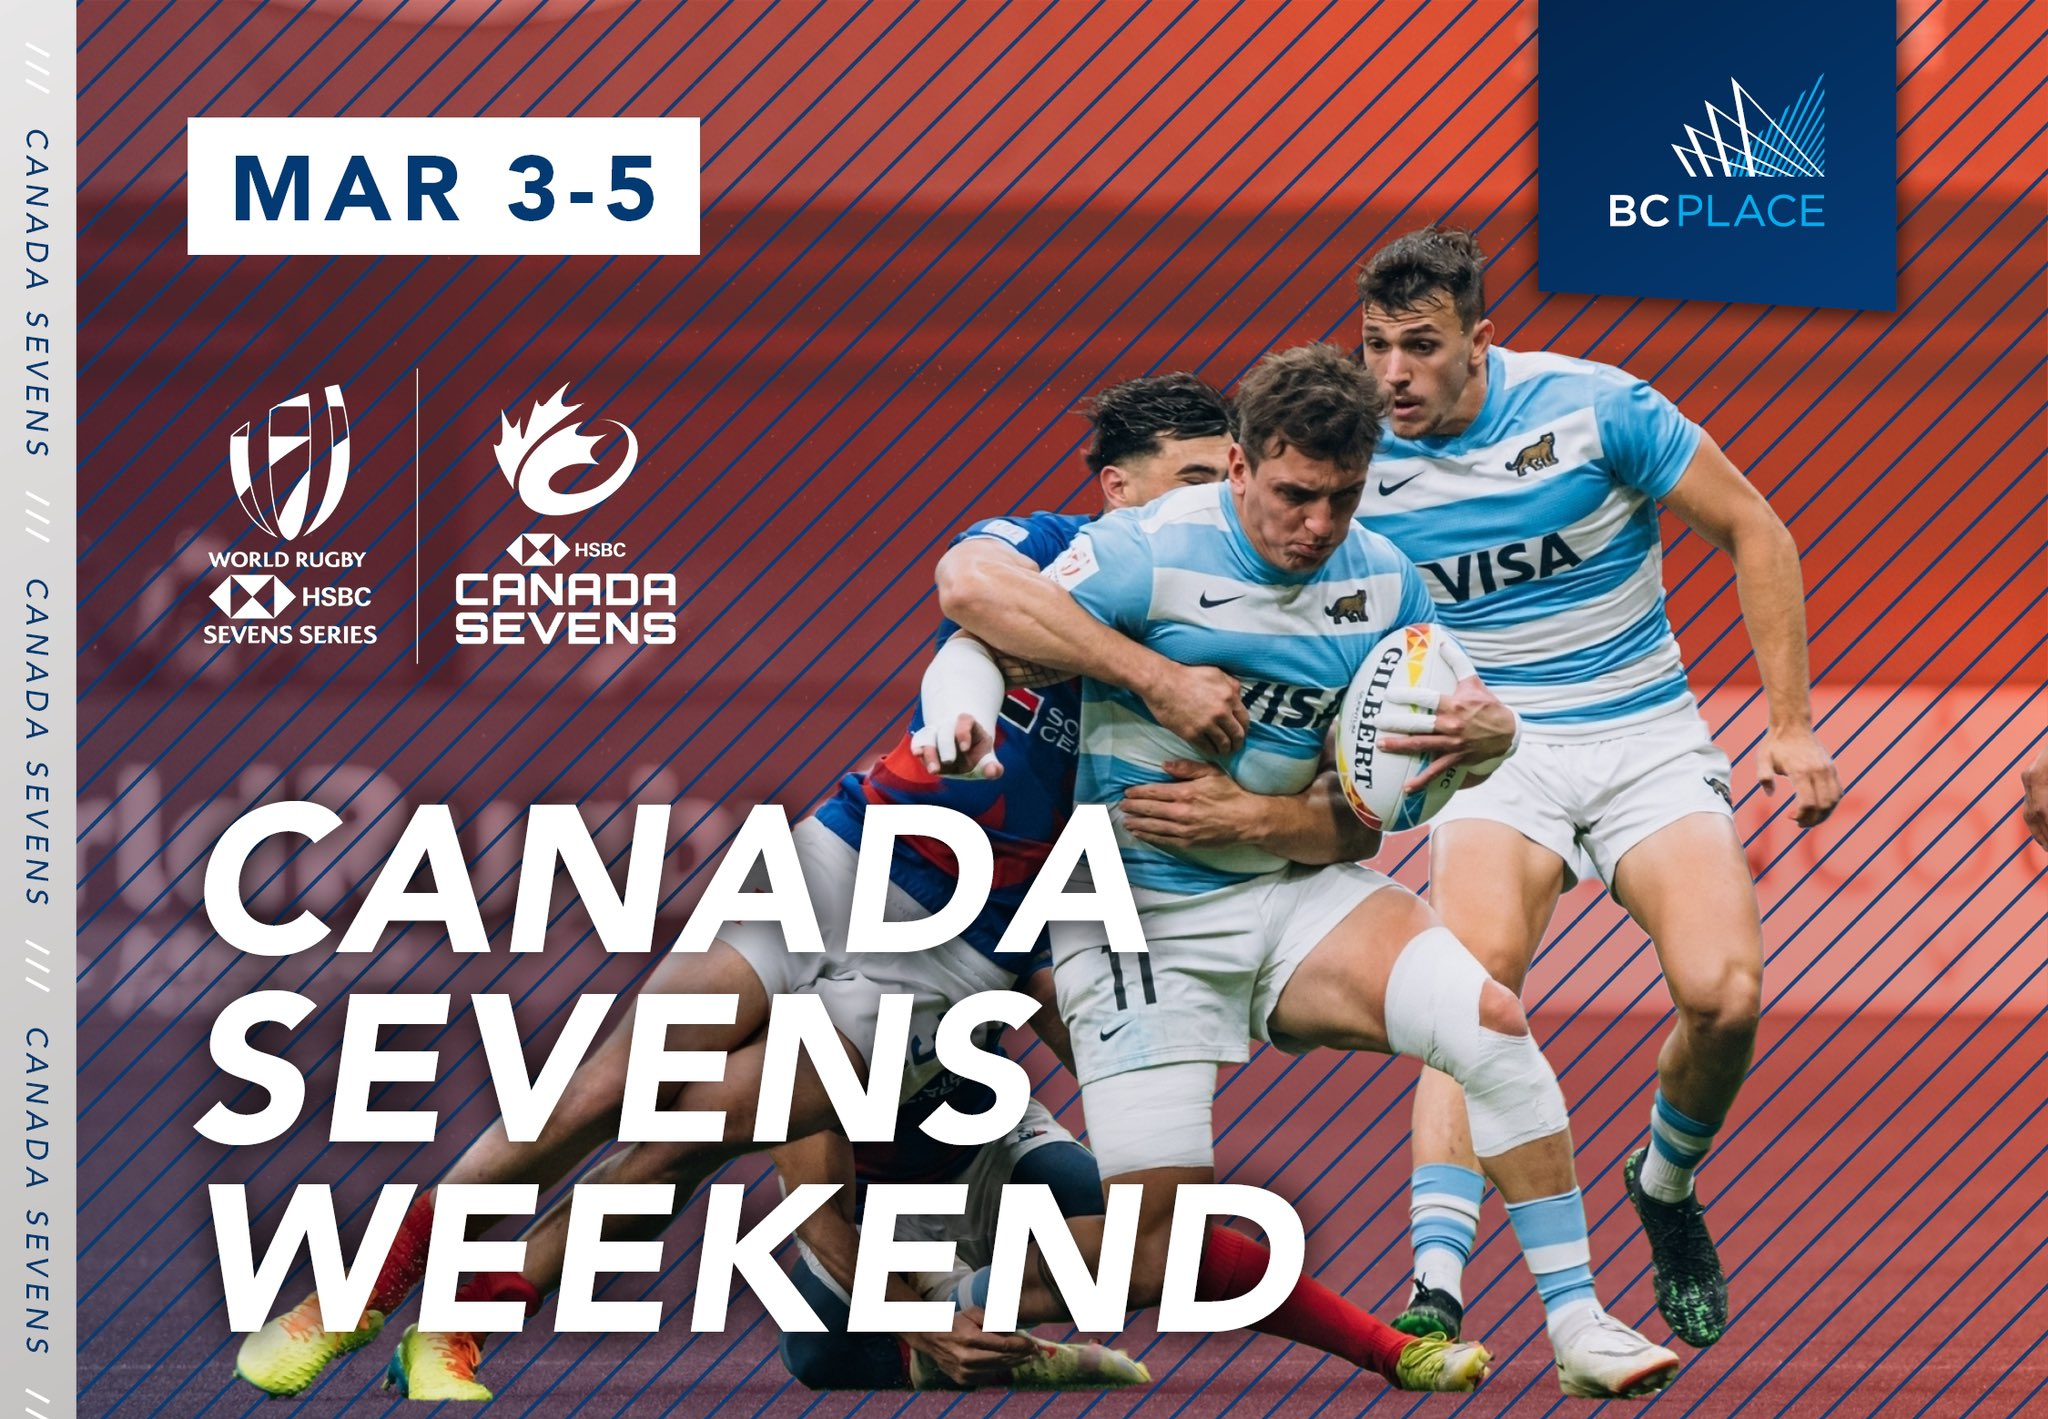 world rugby 7s live stream